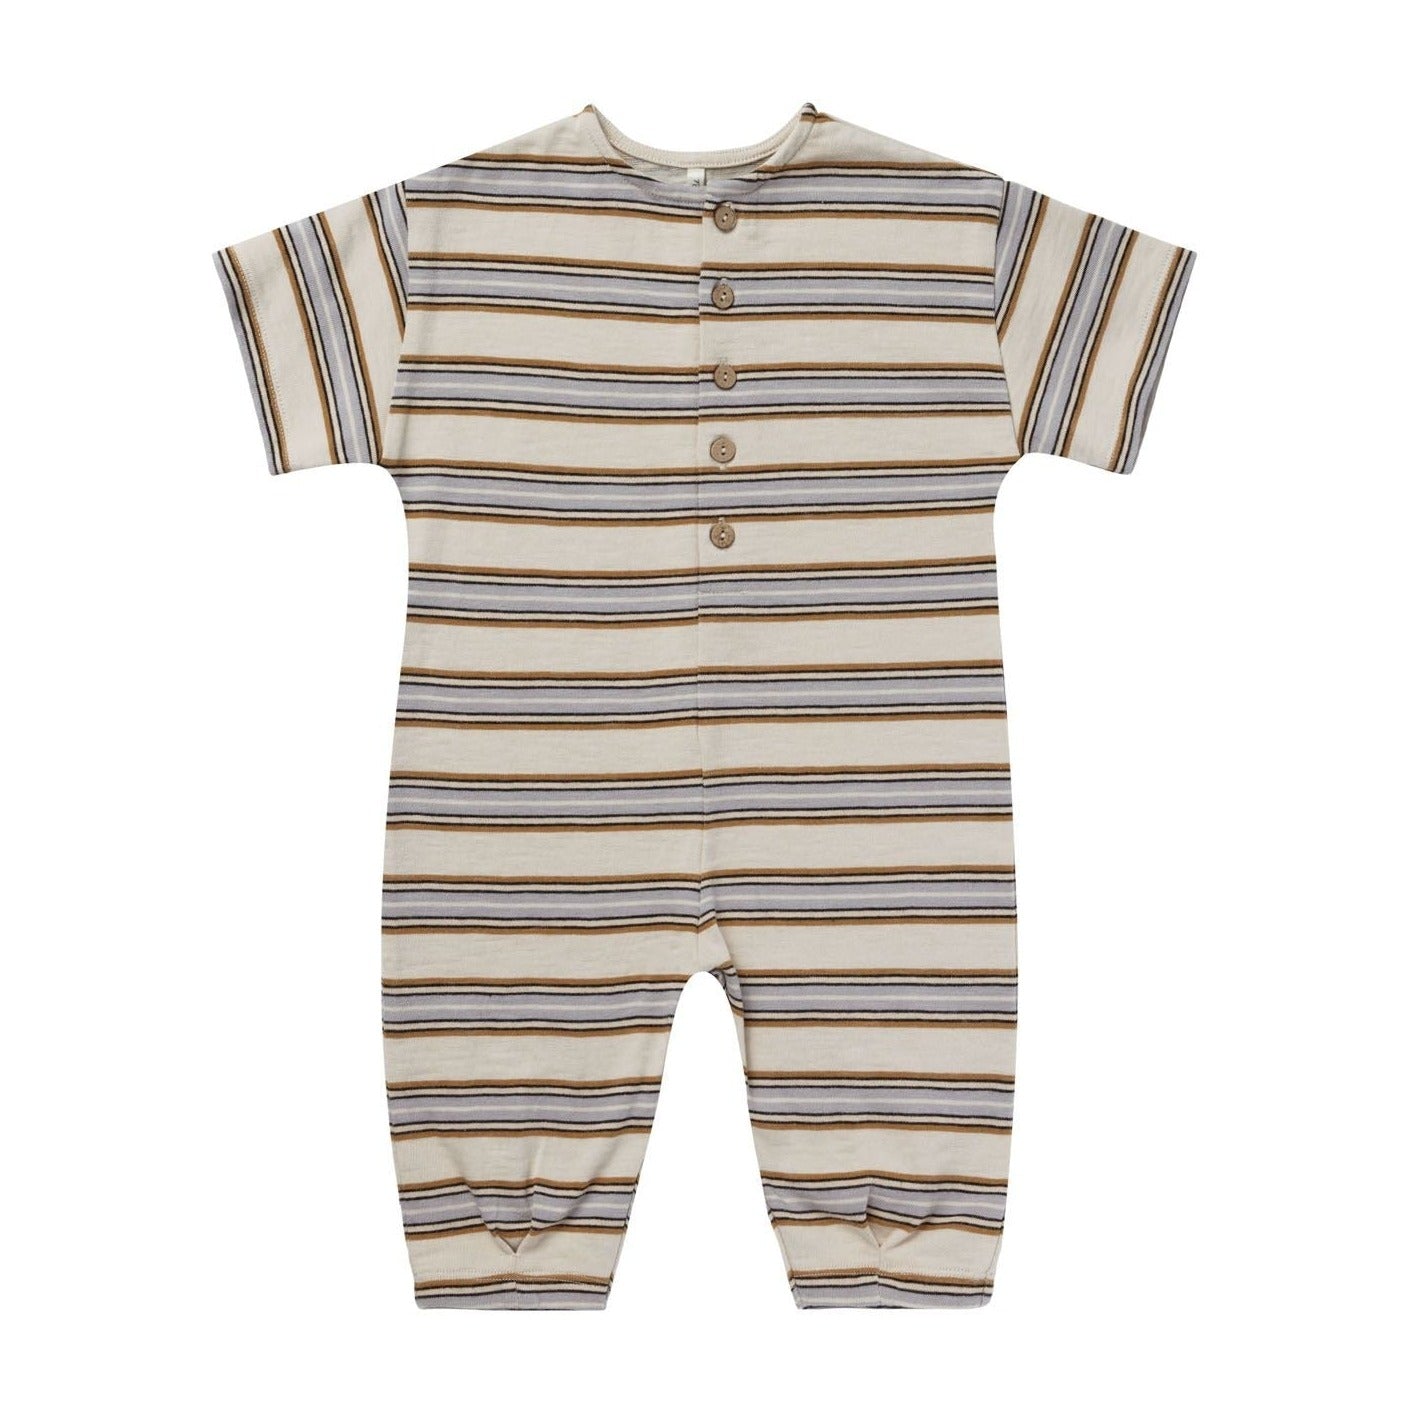 Rylee and Cru Hayes Jumpsuit - Vintage Stripe - Brass / French Blue / Sand